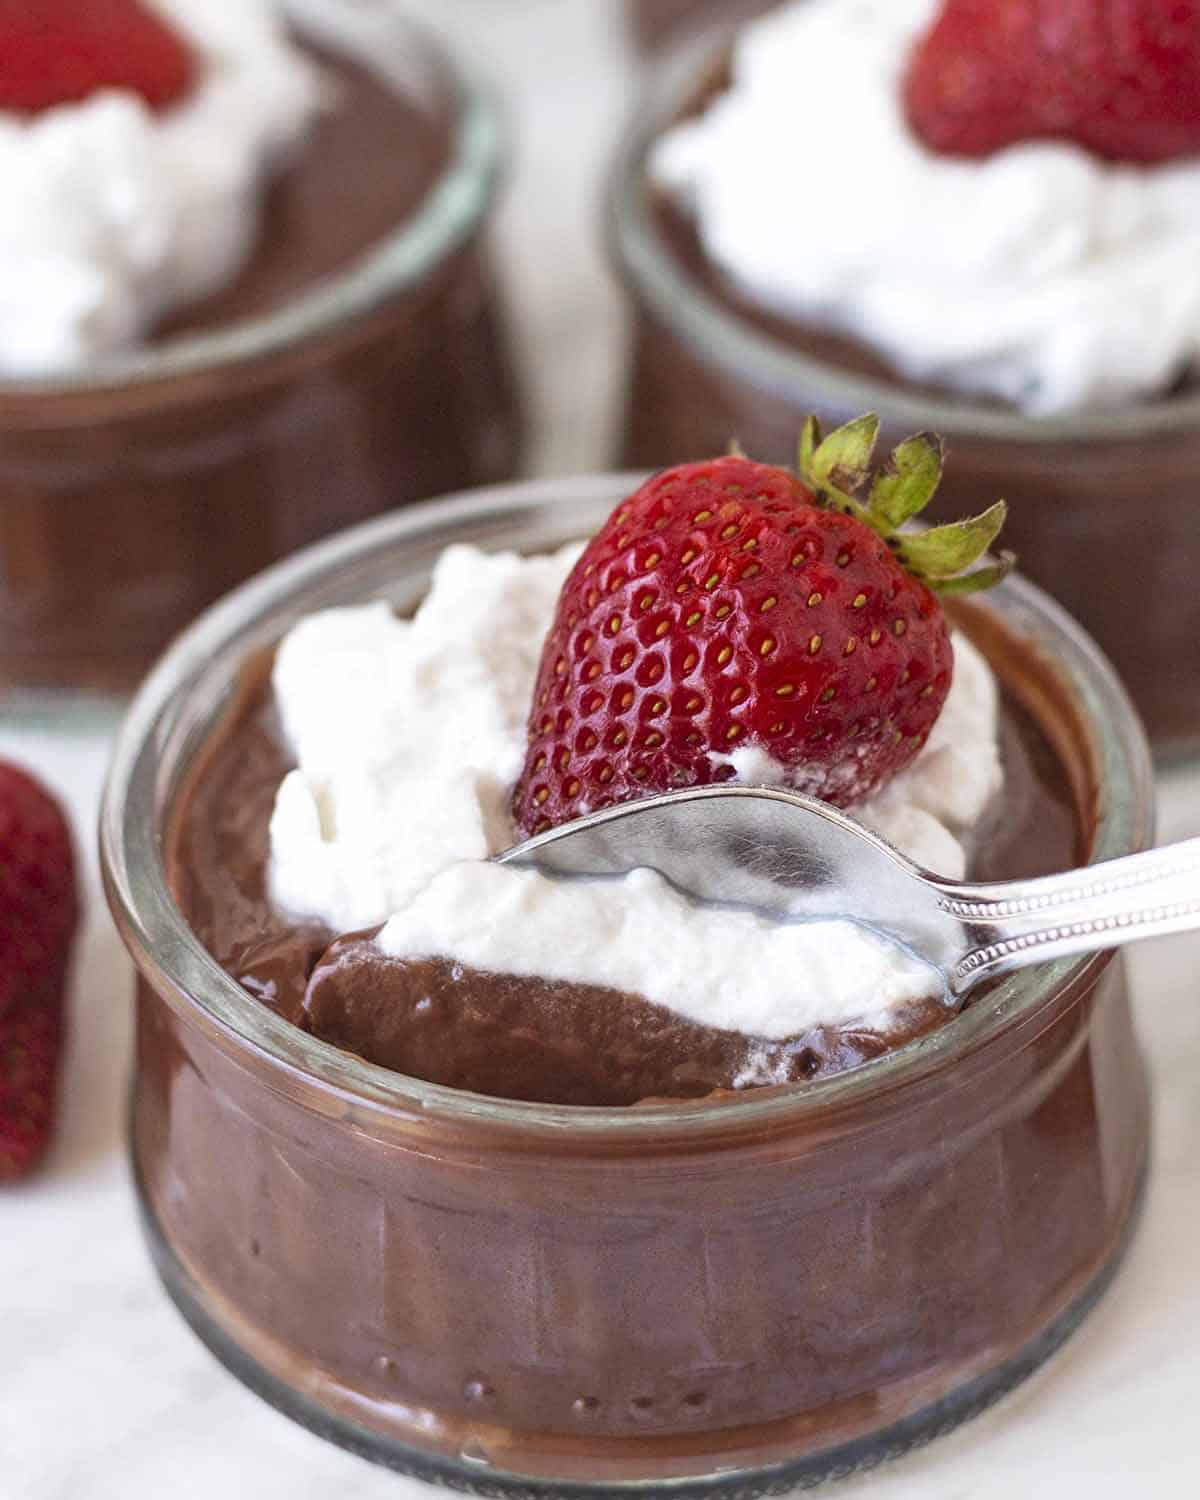 A spoon scooping out a spoonful of chocolate pudding and coconut whipped cream from a small bowl.